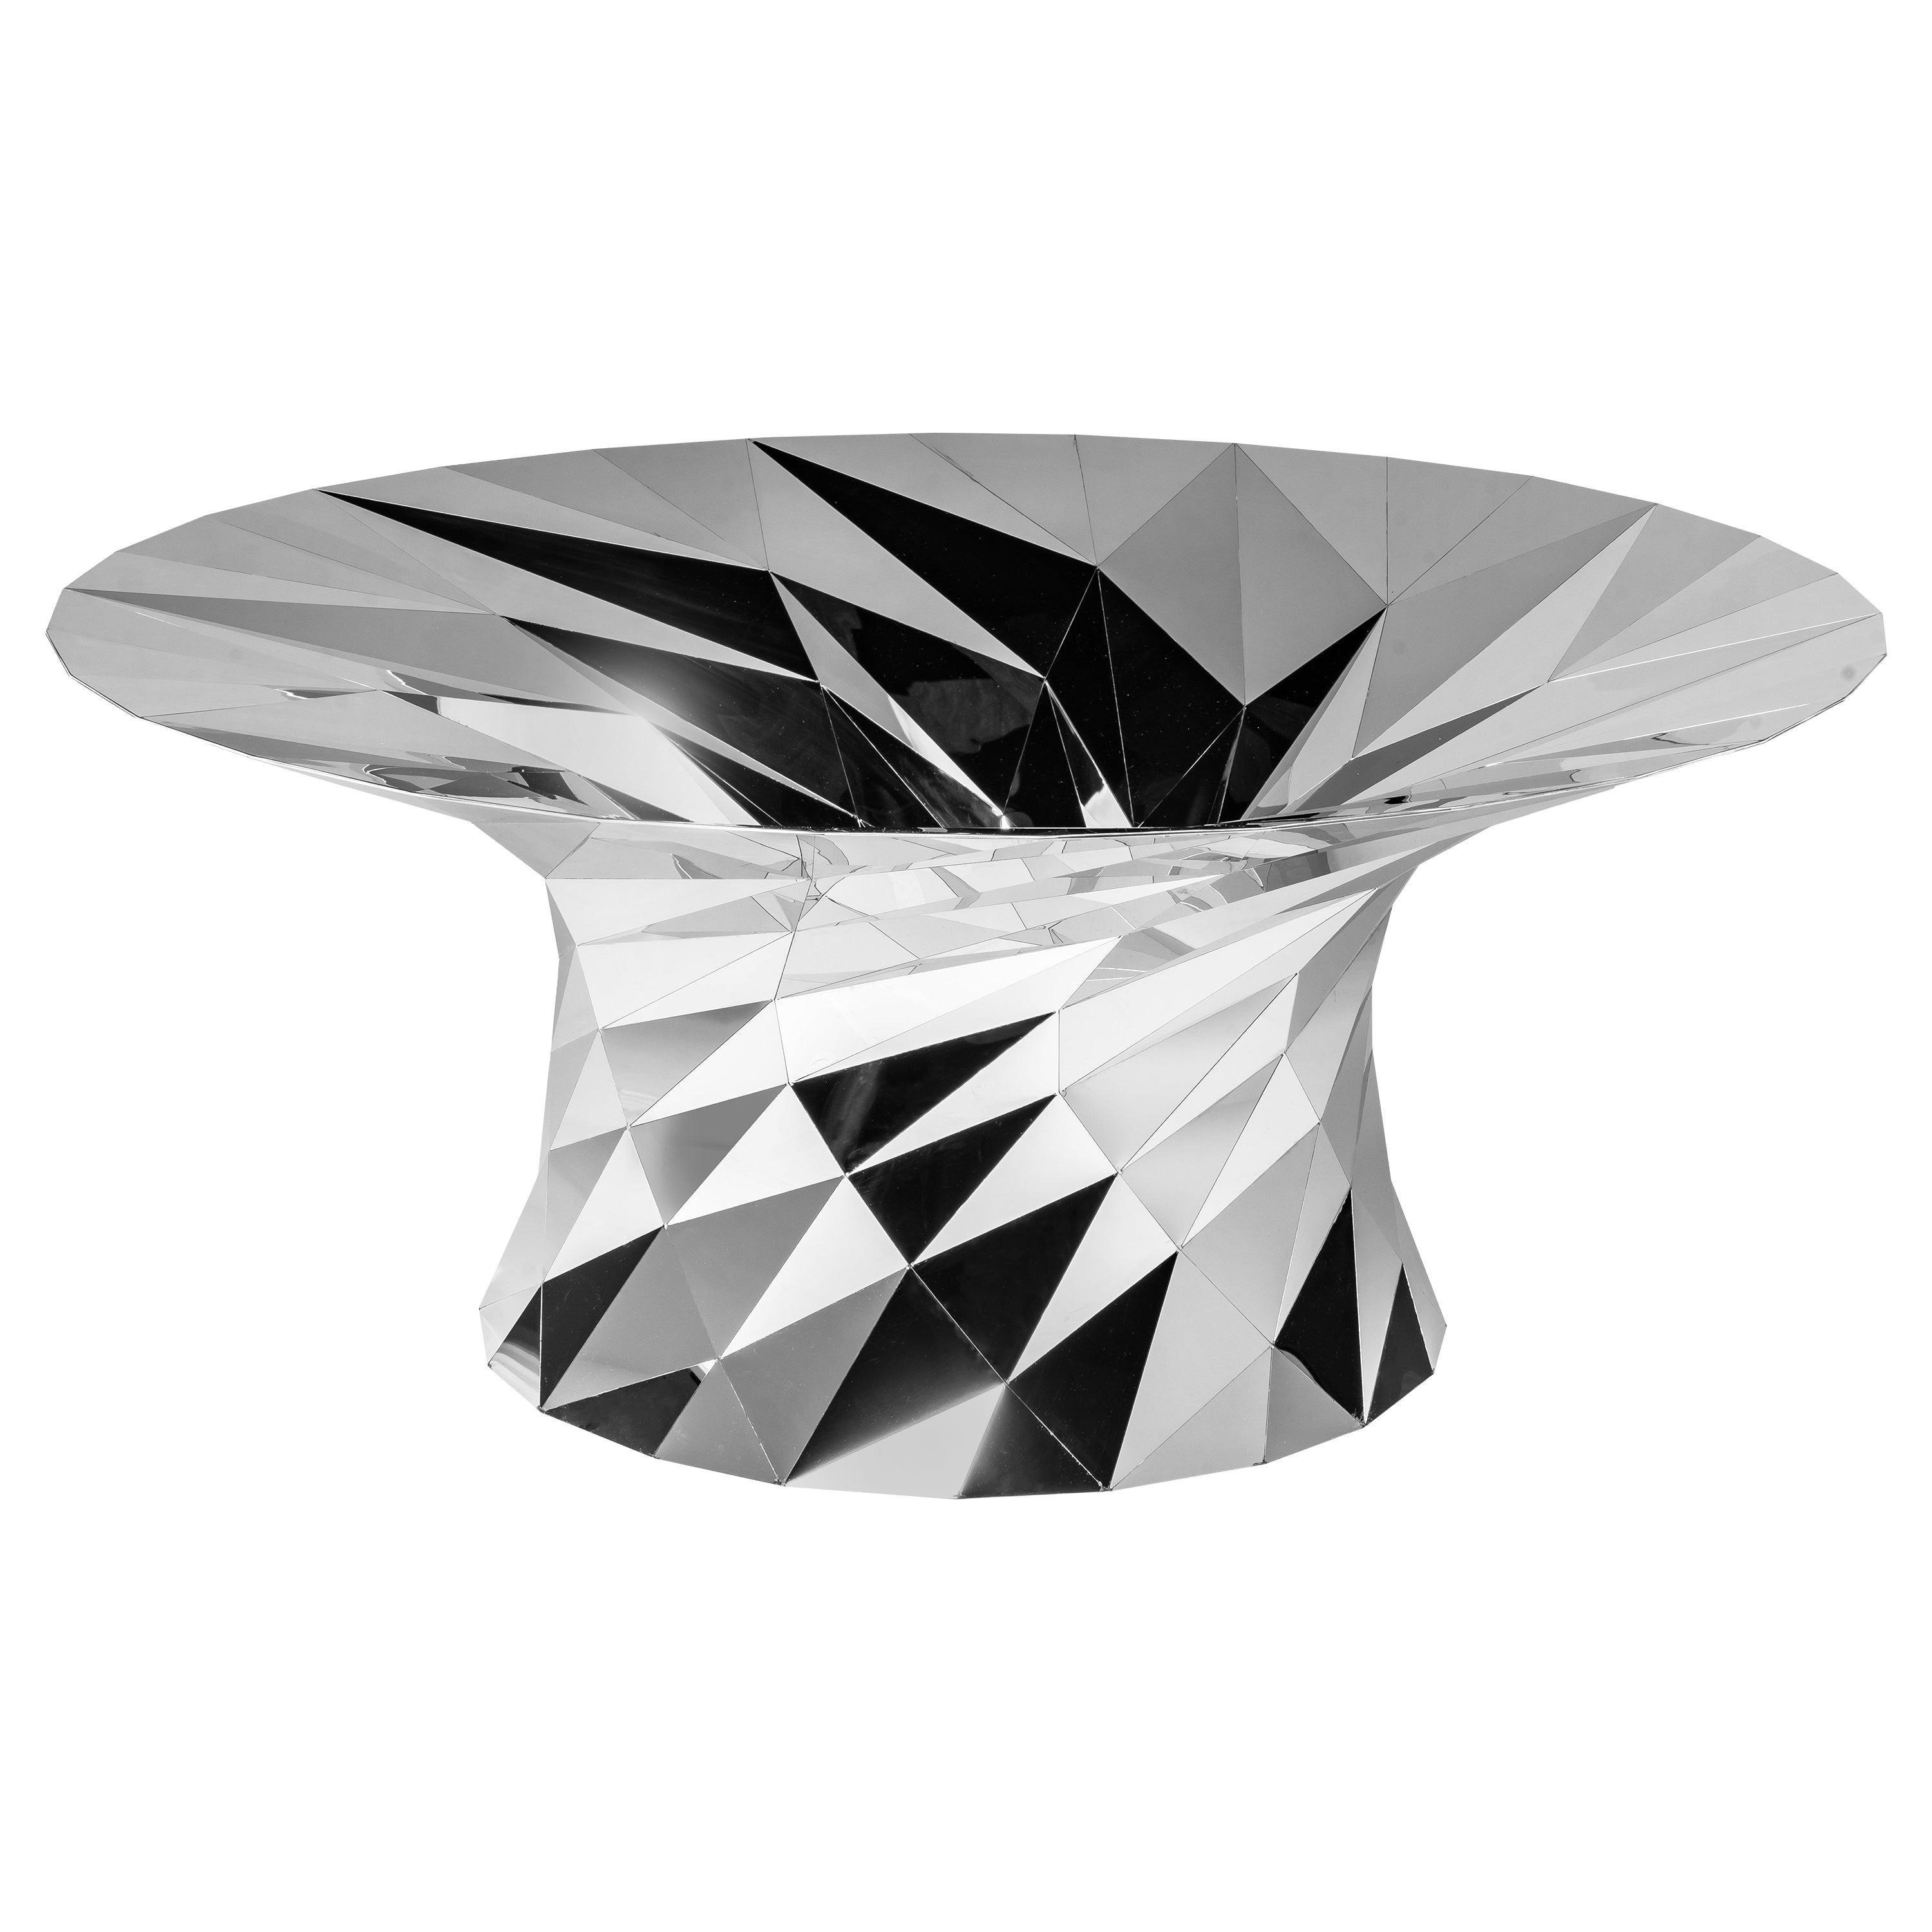 Object #MT-T1-S-L Mirror Polished Stainless Steel Table by Zhoujie Zhang For Sale